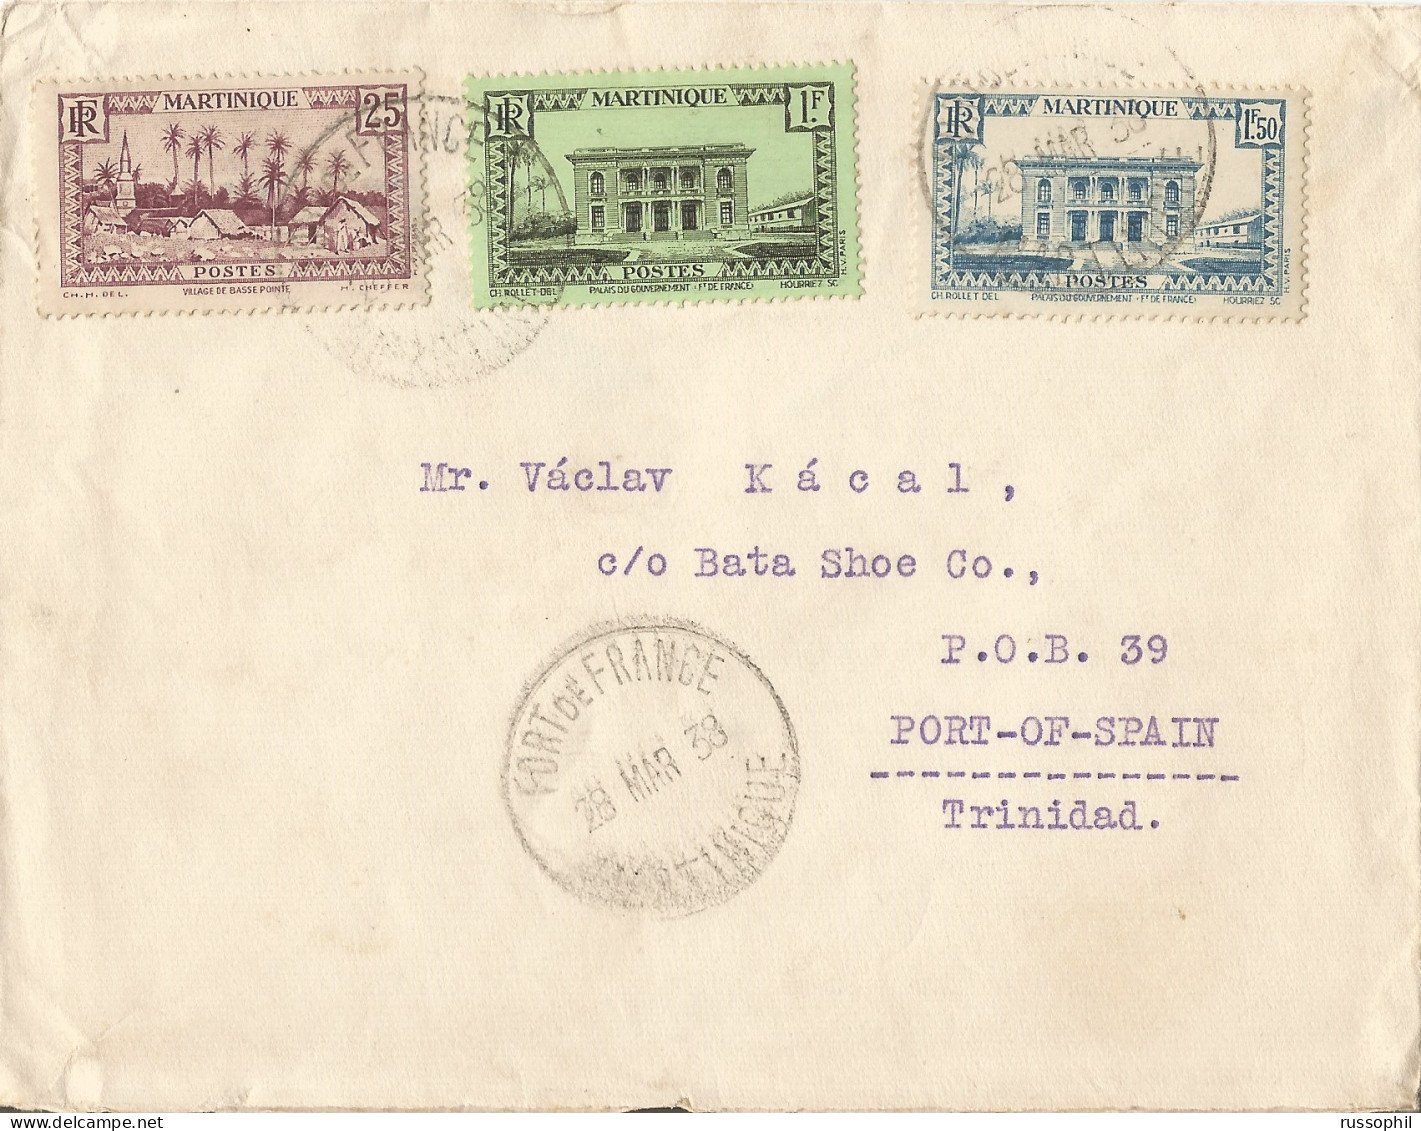 MARTINIQUE - 2 FR.  75 CENT. FRANKING ON COVER FROM FORT DE FRANCE TO TRINIDAD - BATA SHOES - 1938 - Covers & Documents